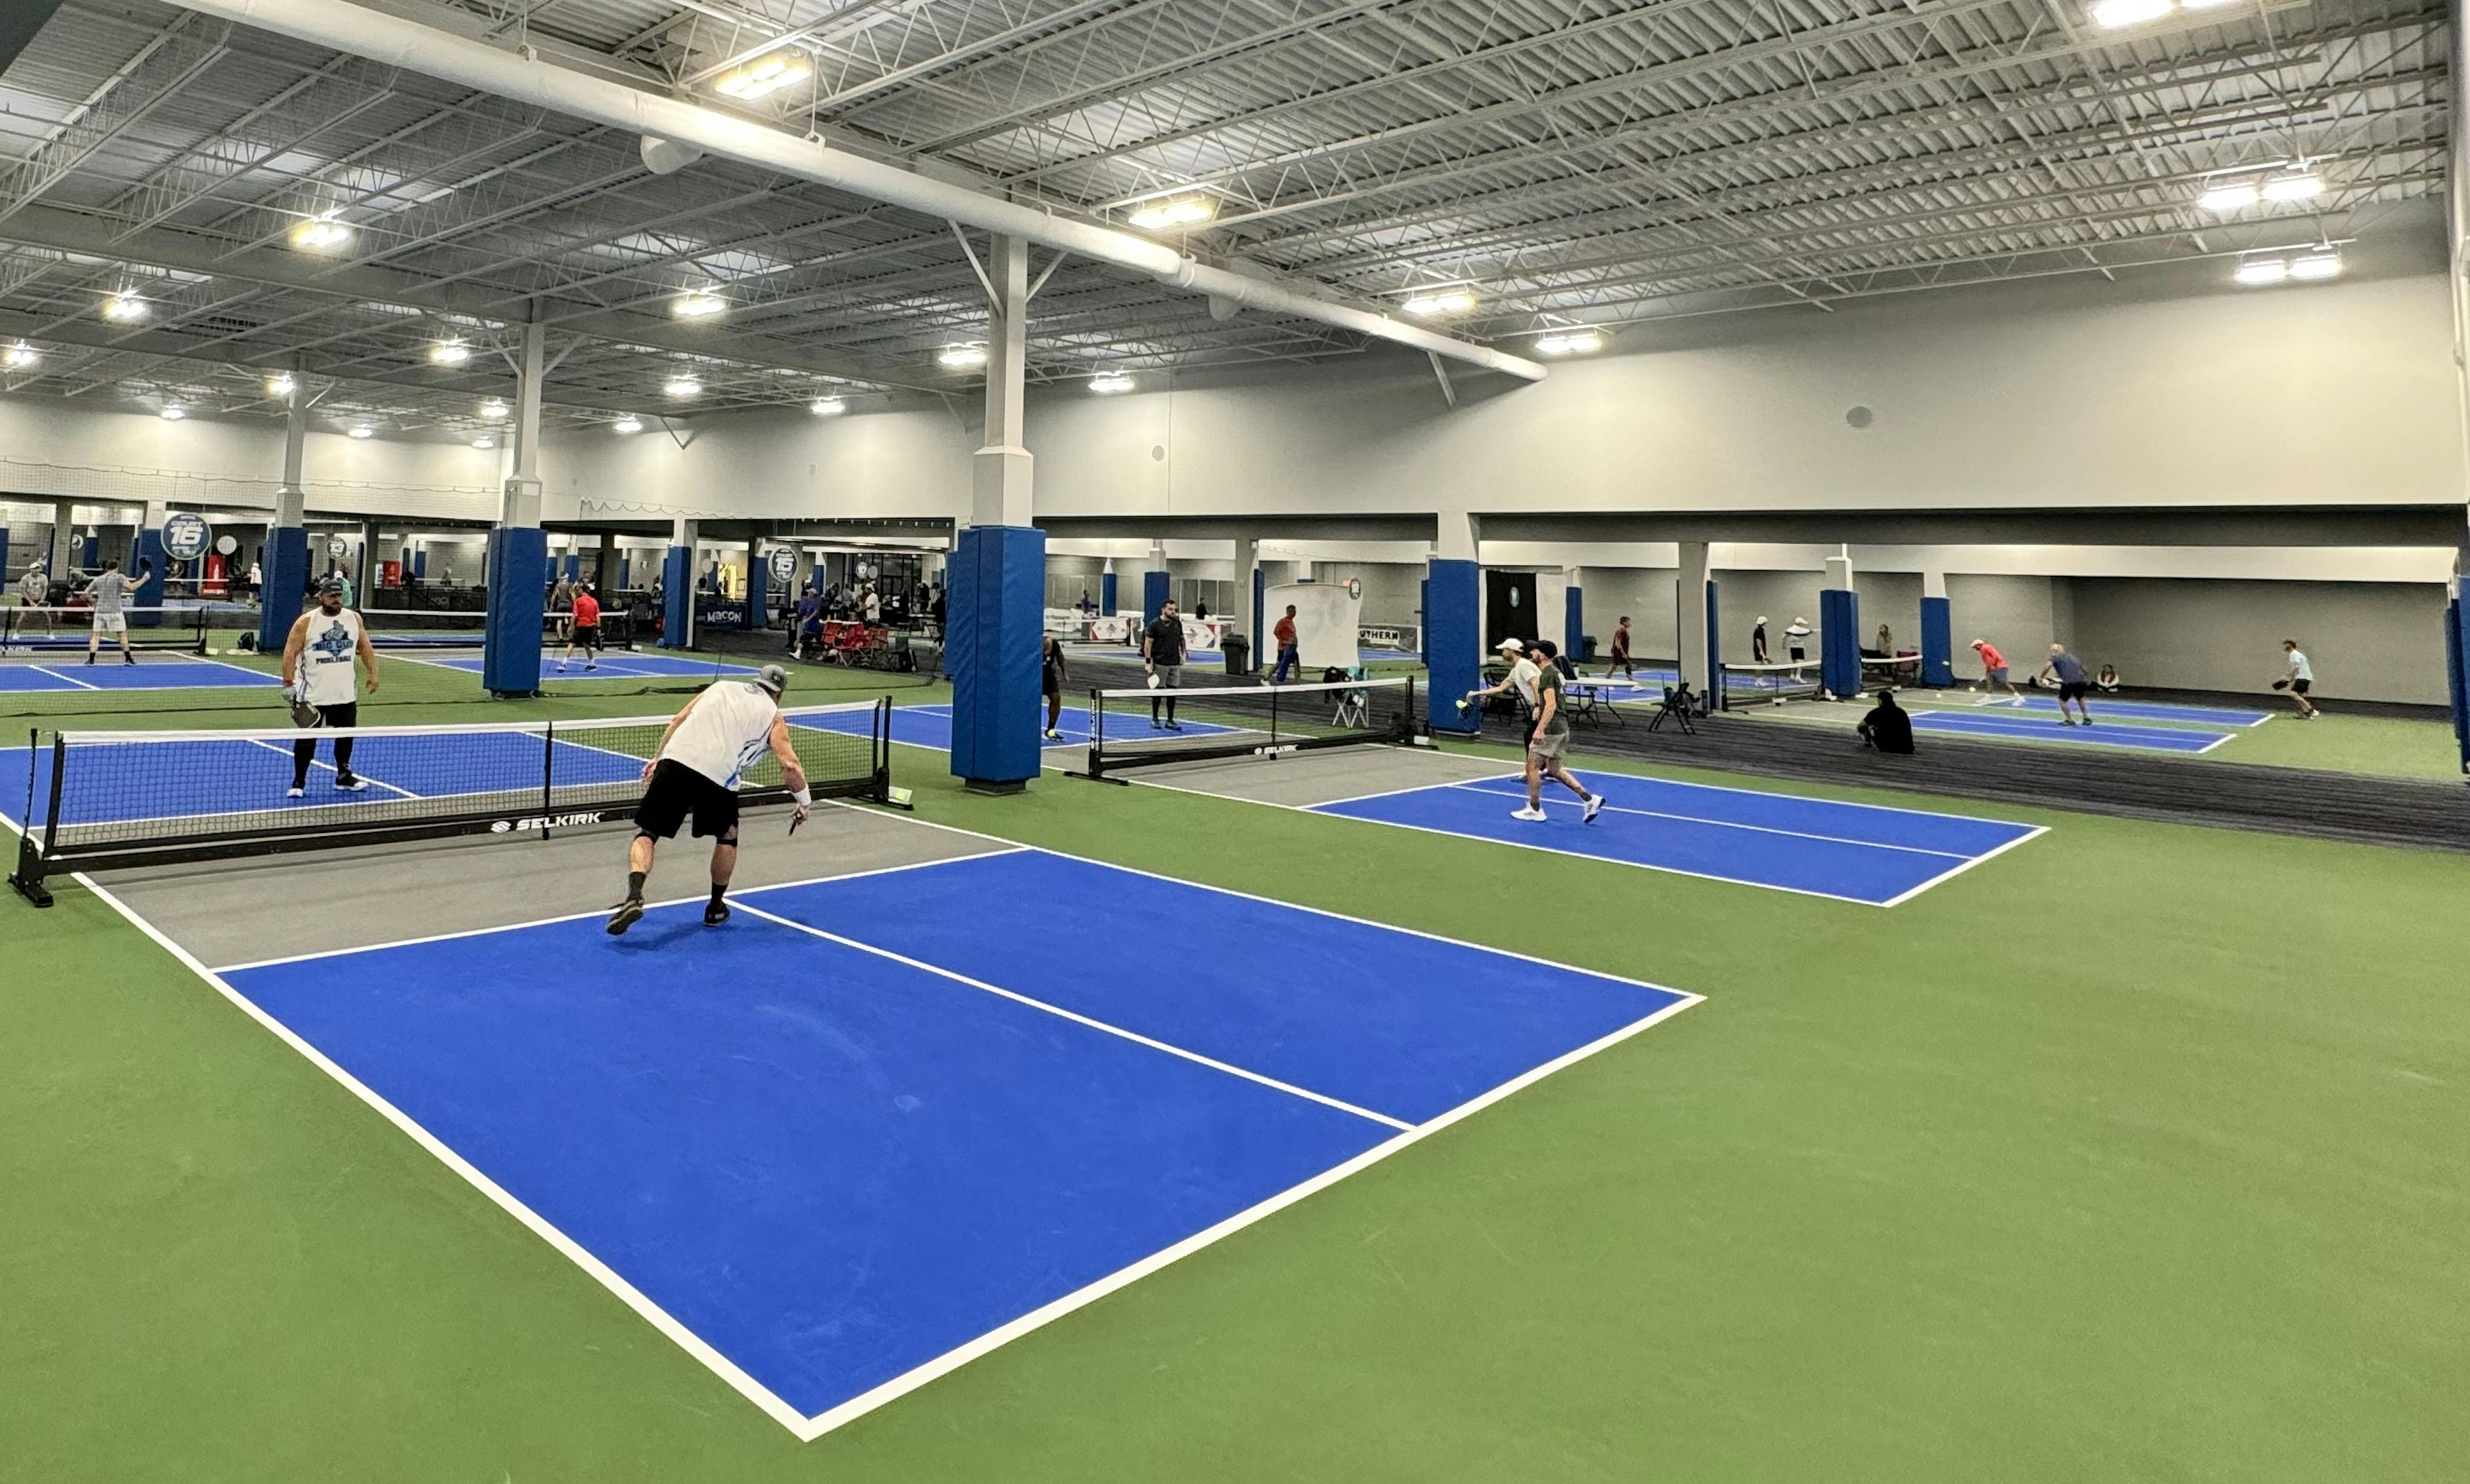 People playing pickleball on multiple courts indoors